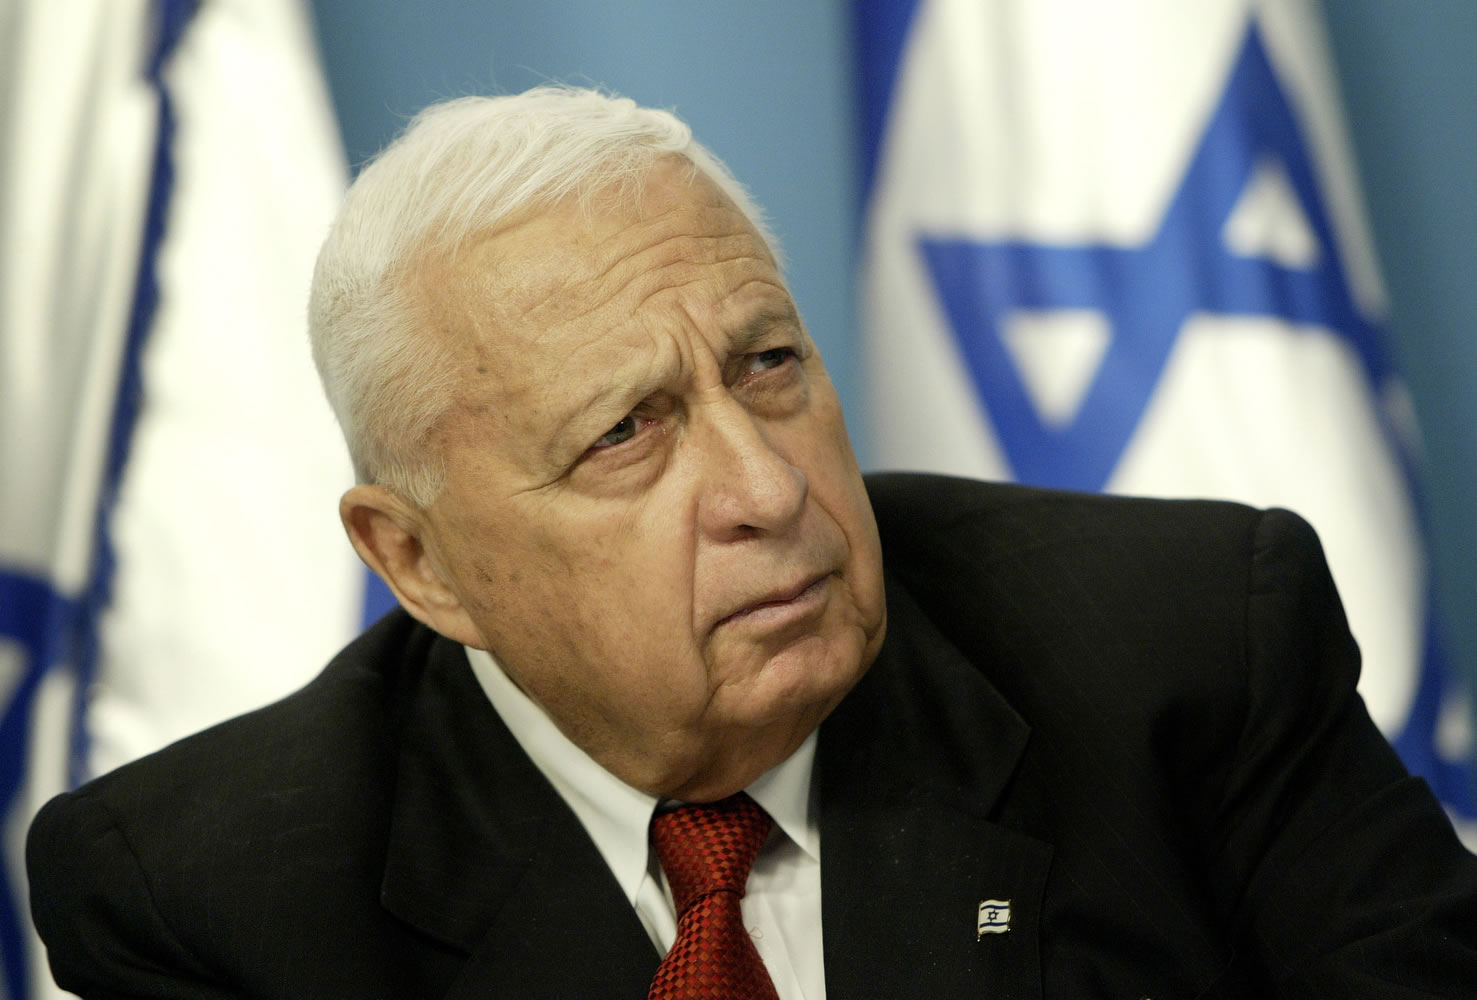 Then Israeli Prime Minister Ariel Sharon pauses during a news conference in his Jerusalem office regarding education reform on May 16, 2004.